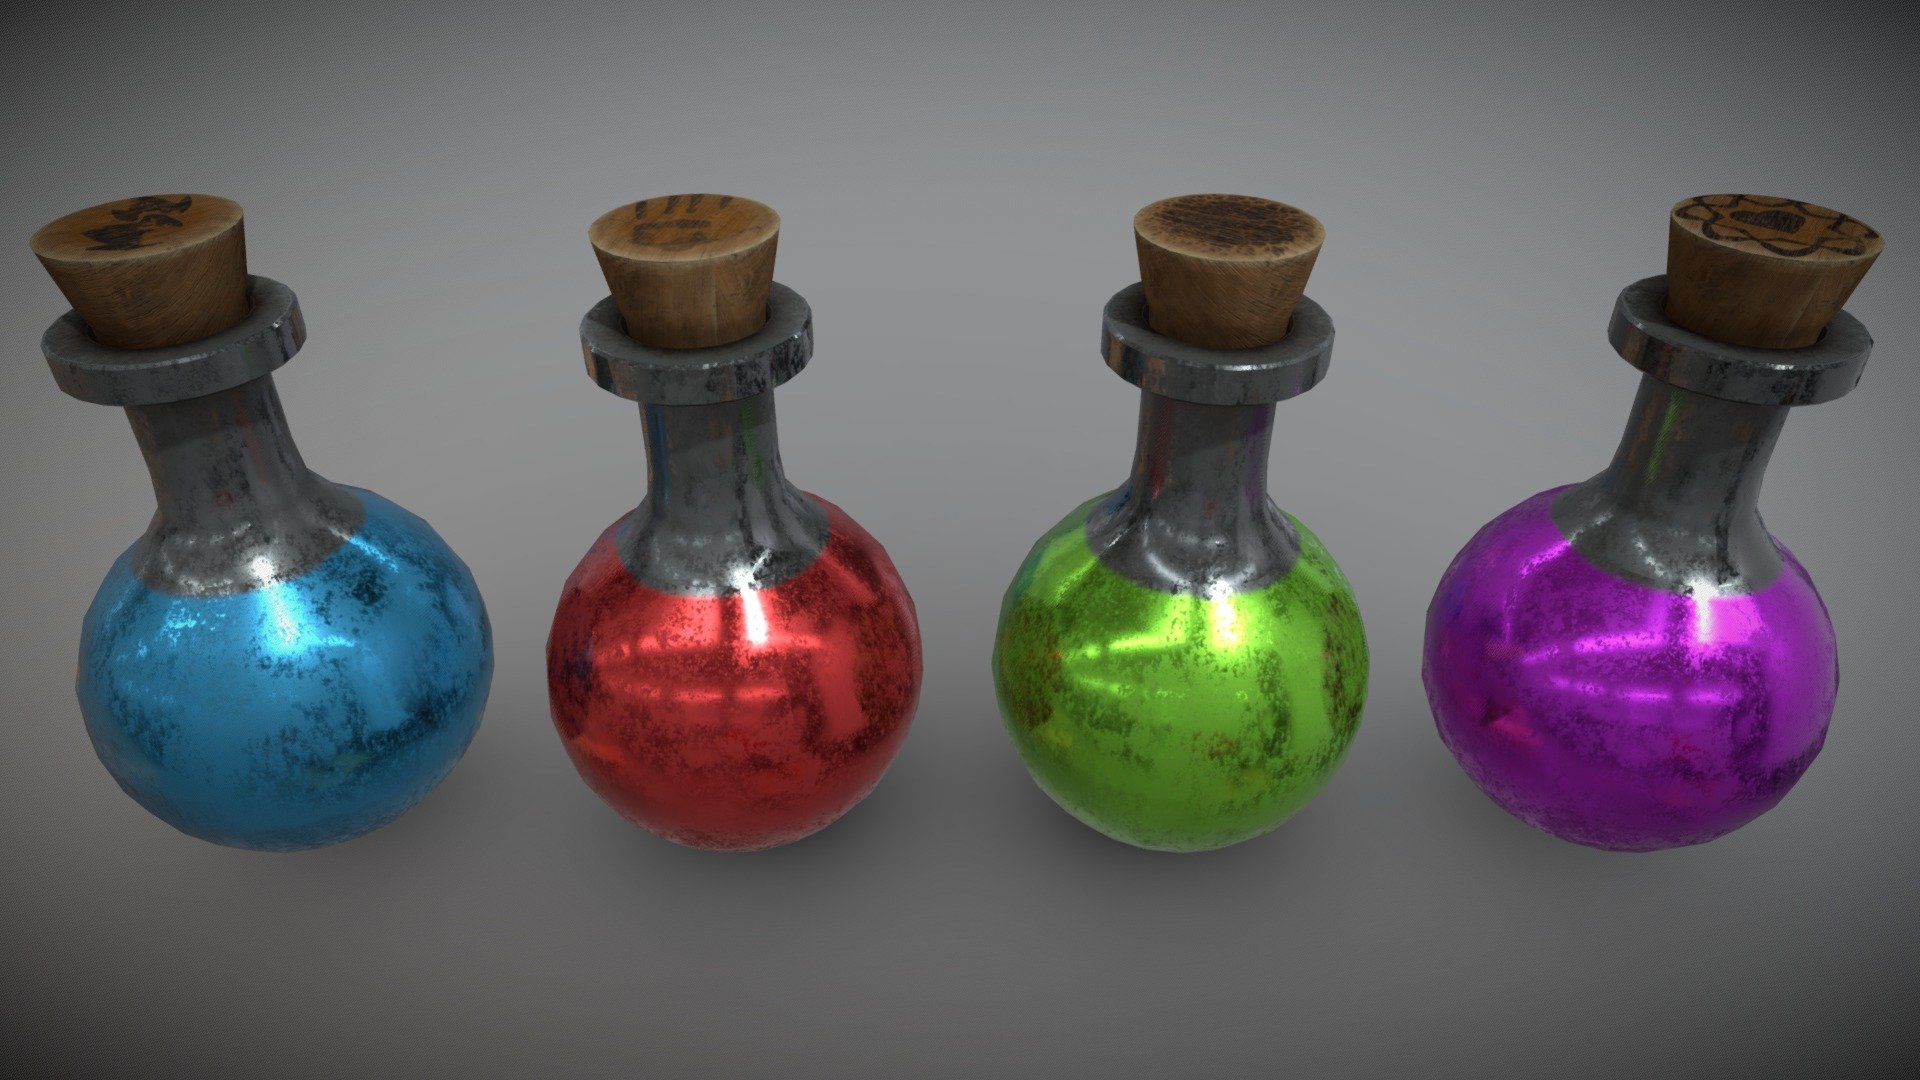 3D low-poly models of Colored Potions

ver. 2.0 of previous Alchemist Potions

Only an alchemist will tell you exactly which potion is needed for what.

Low-poly and 2k textures are very easy for any engine - 4 Colour Alchemist Sphere Like Potions - Download Free 3D model by Incg5764 3d model